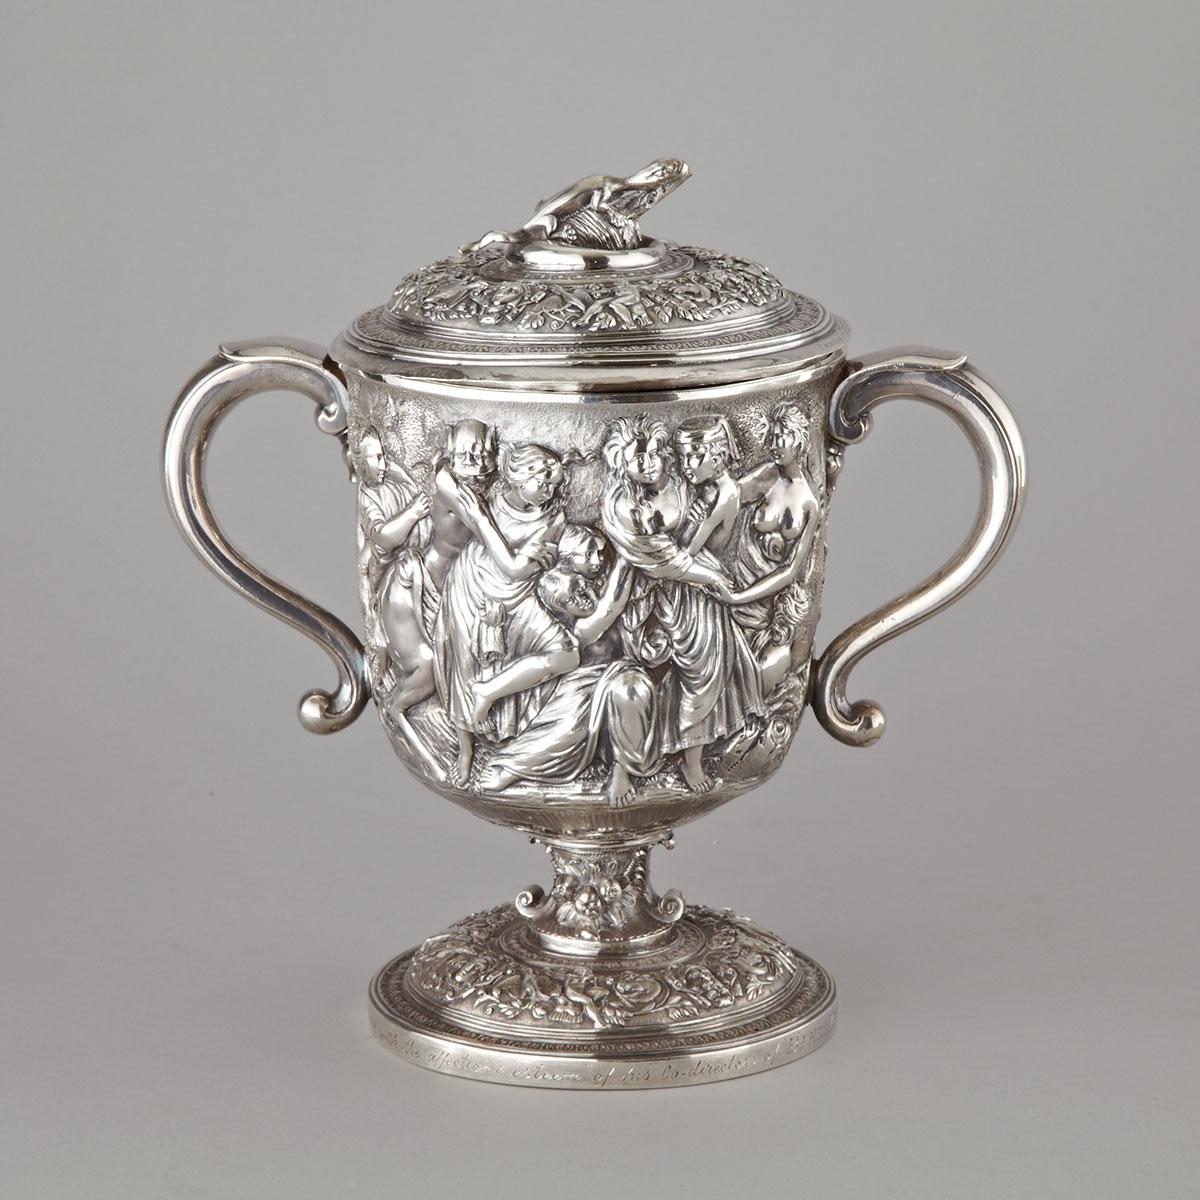 Late Georgian Silver Two-Handled Cup and Cover, c.1820